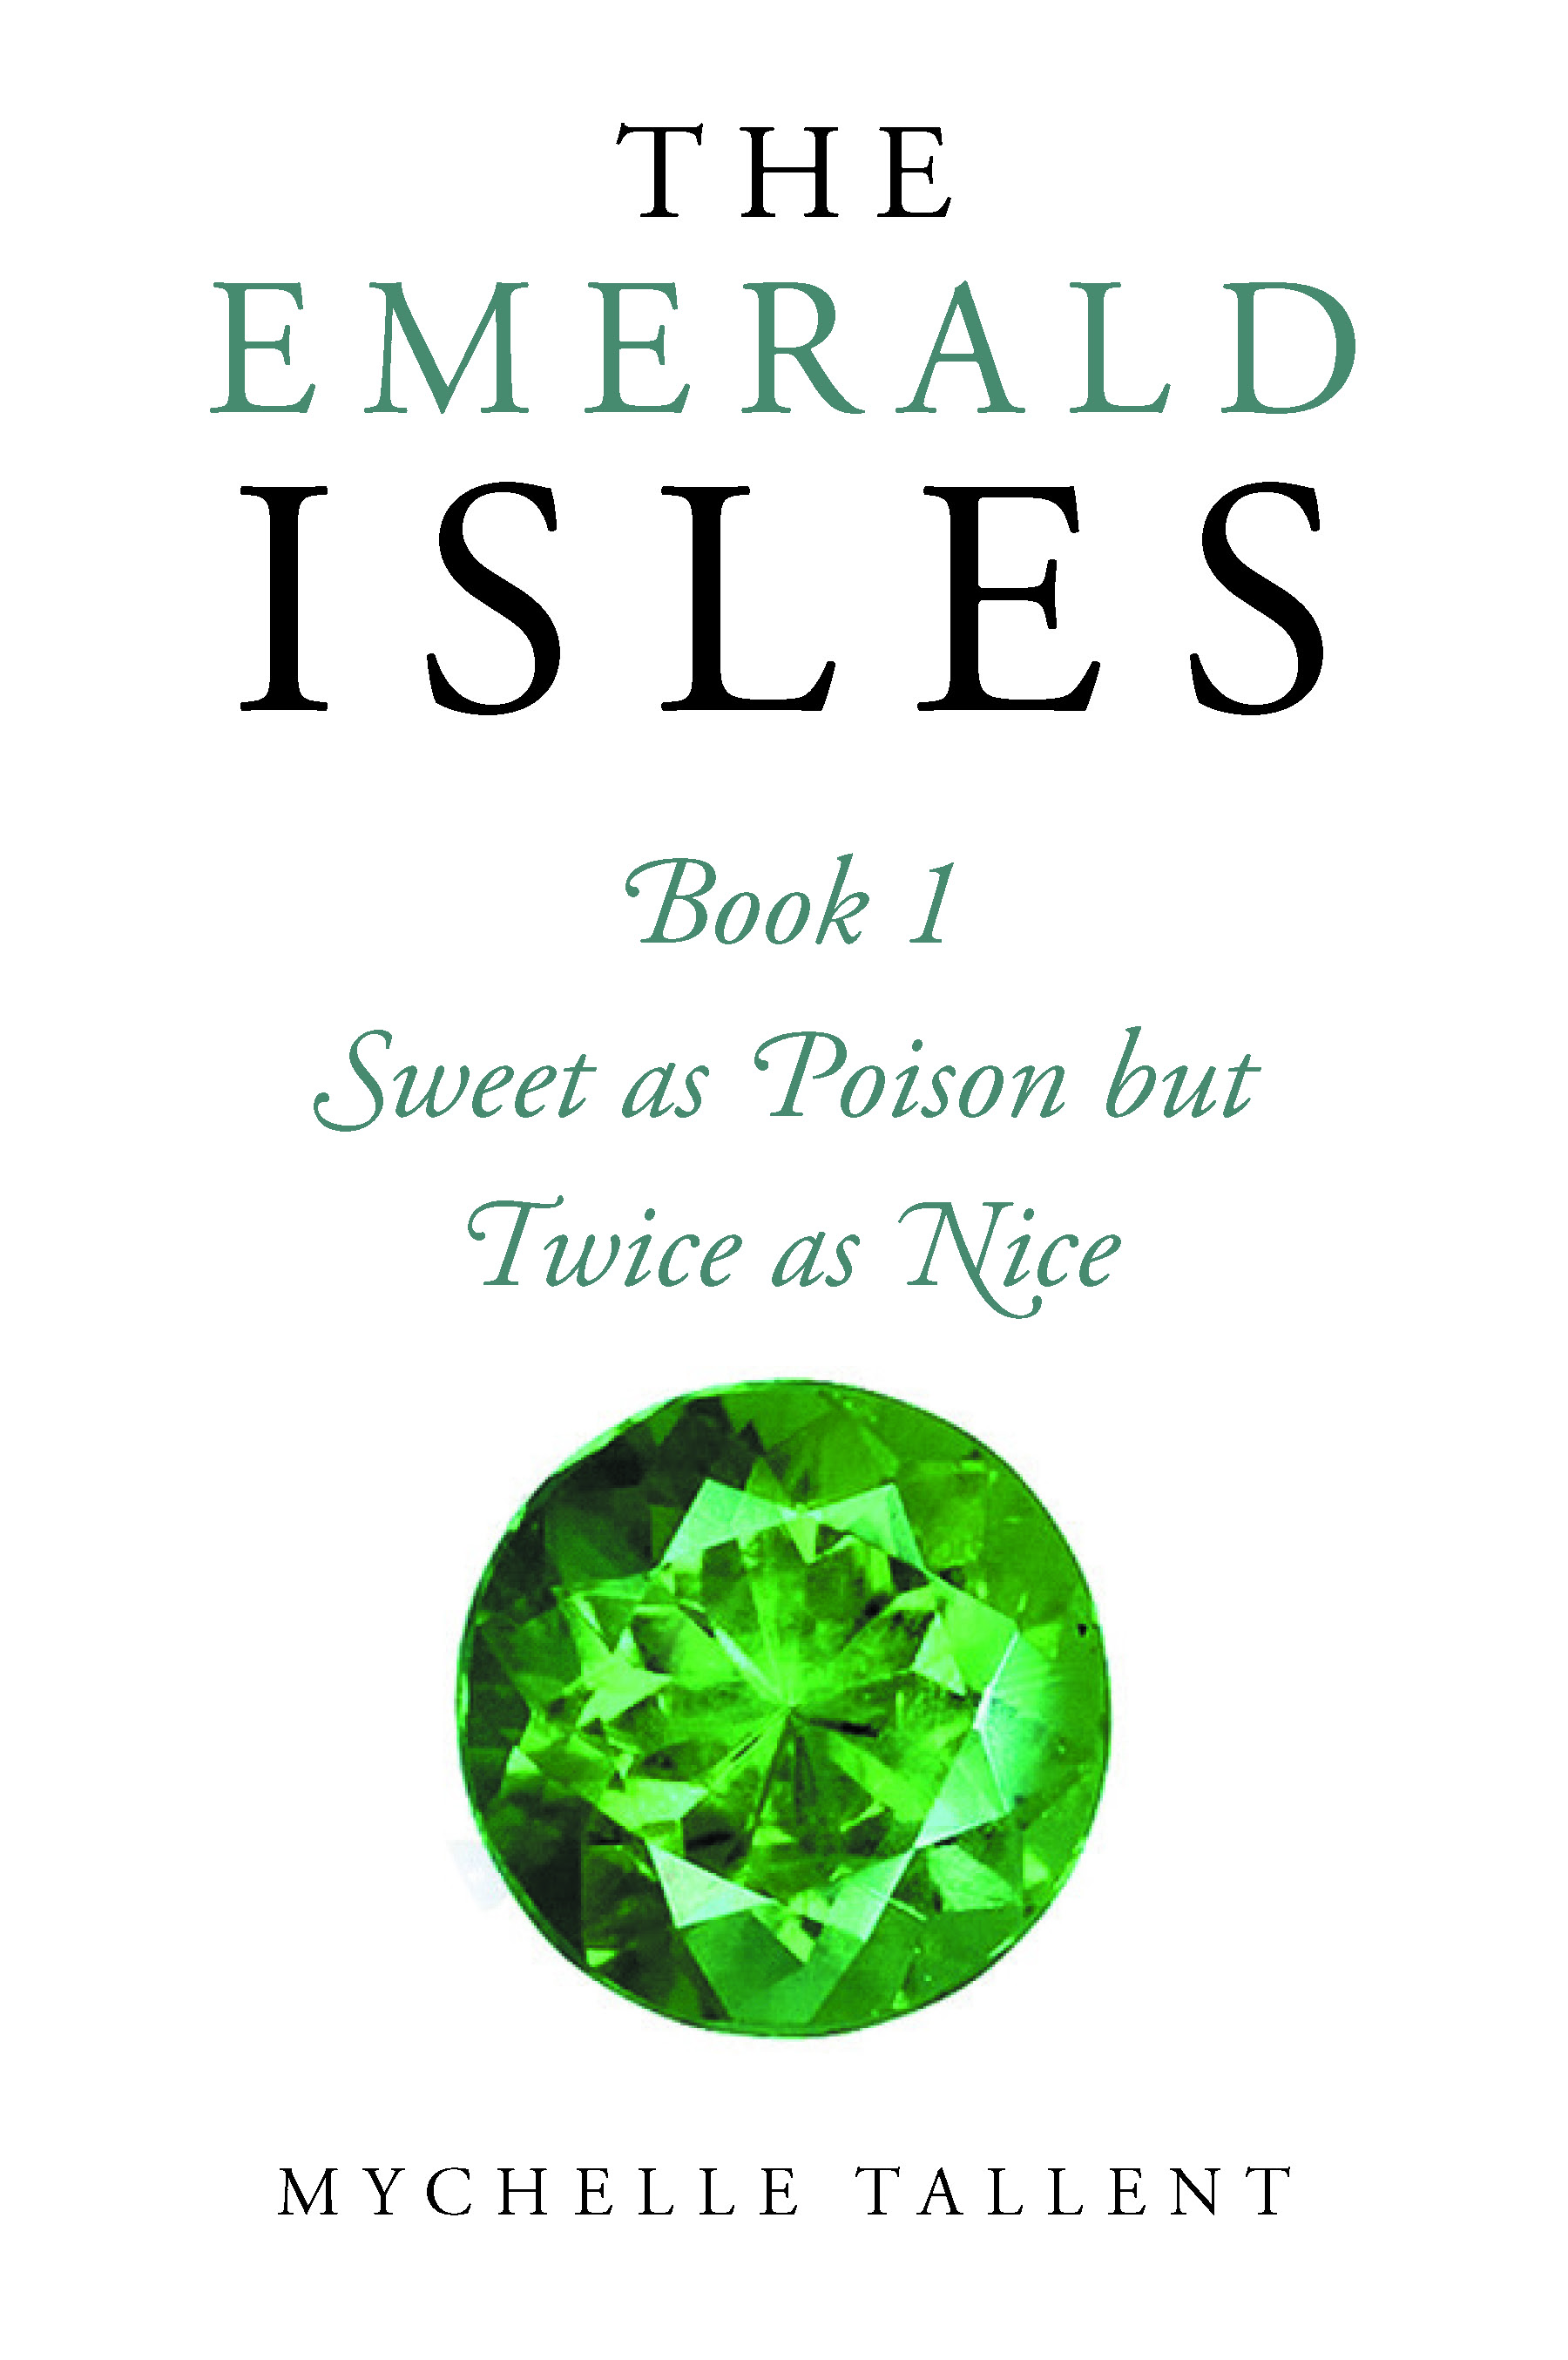 Author Mychelle Tallent’s New Book, "The Emerald Isles: Sweet as Poison But Twice as Nice," Follows a Young Girl’s Relationship with a Stranger Who Harbors Dark Secrets